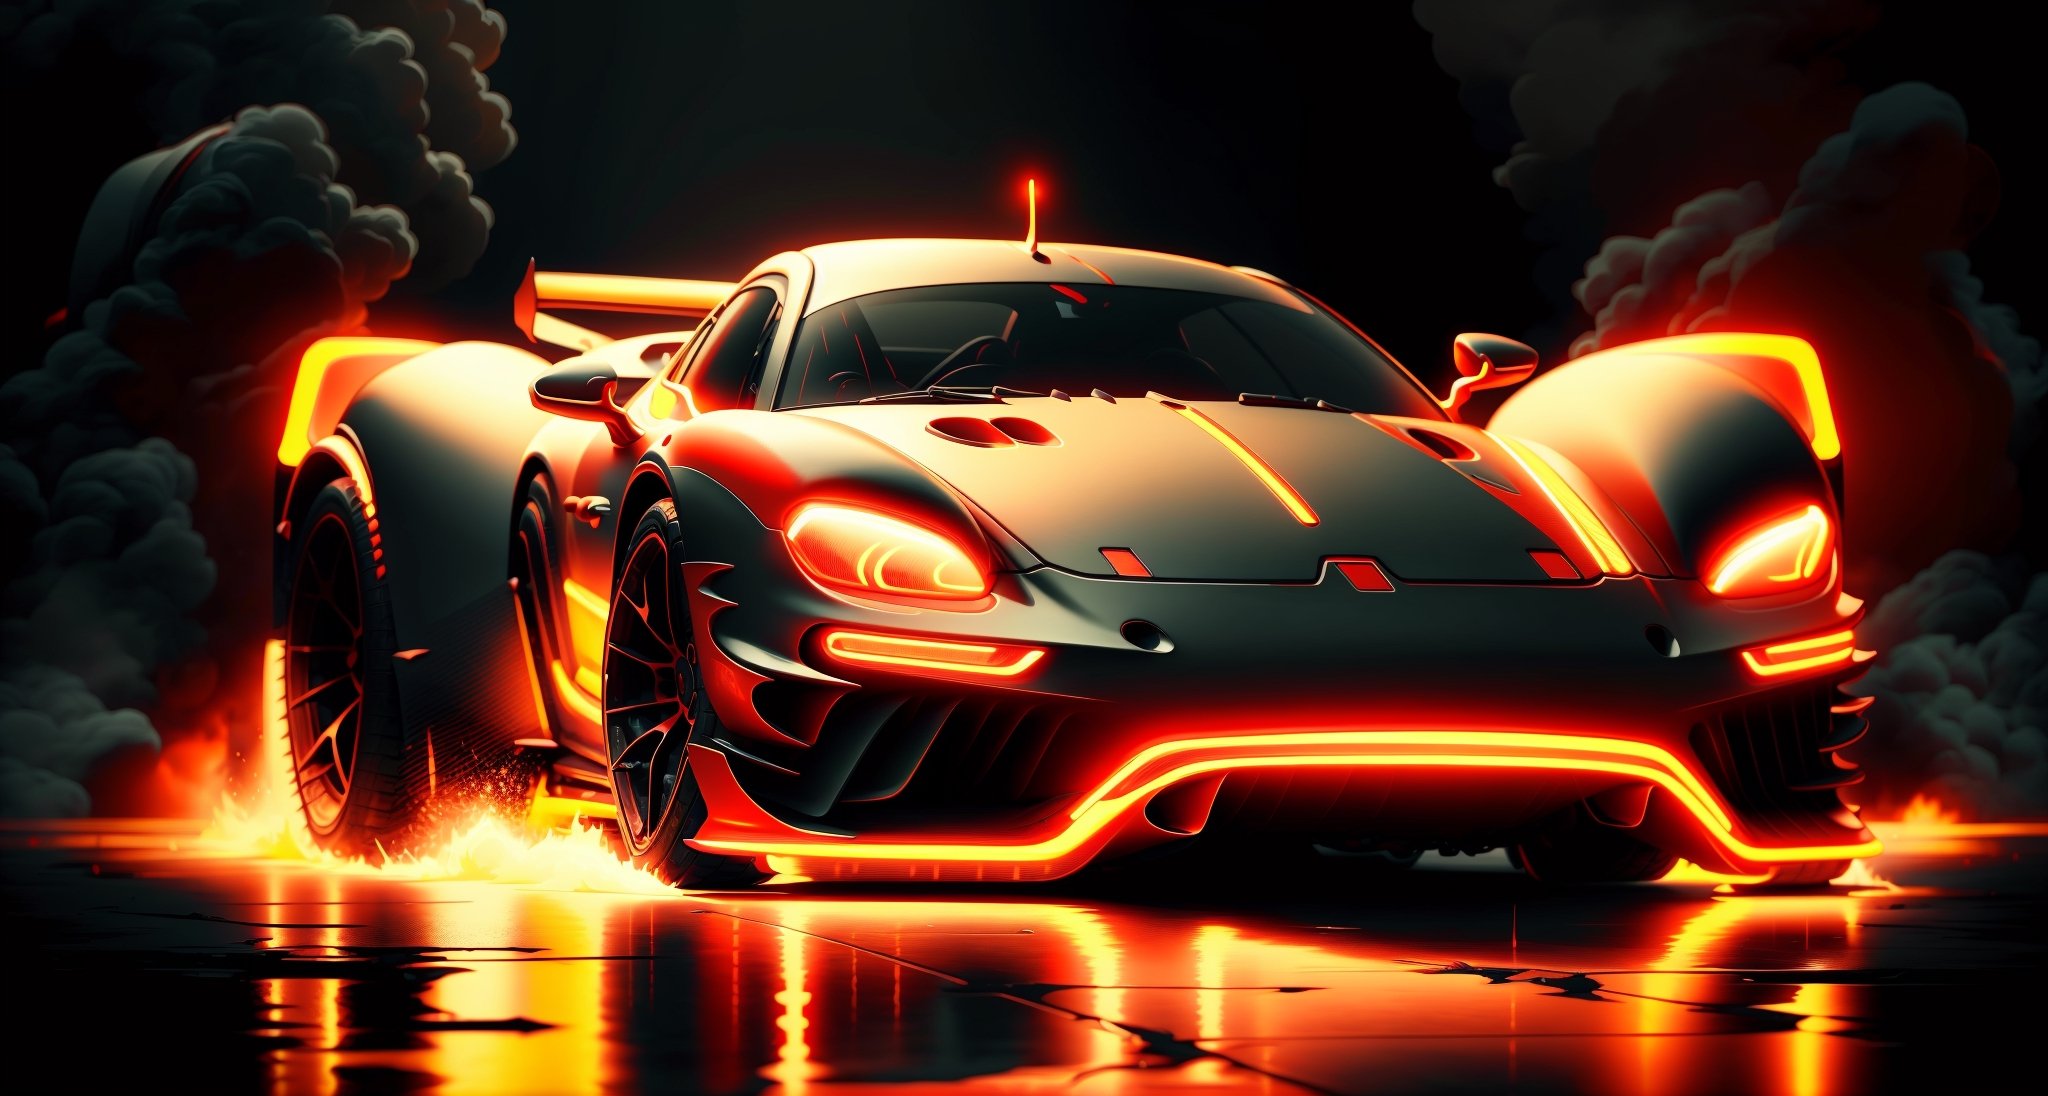 Full of action scenes, Neon RED PORSCHE race car wide body race stripesstrong lighting, Dynamic camera angles, cinema experience, fast paced sport, drama composition, bright colors, High-resolution visuals, dramatic storytelling, wide format cinema lens, immersive atmosphere
,MagmaTech